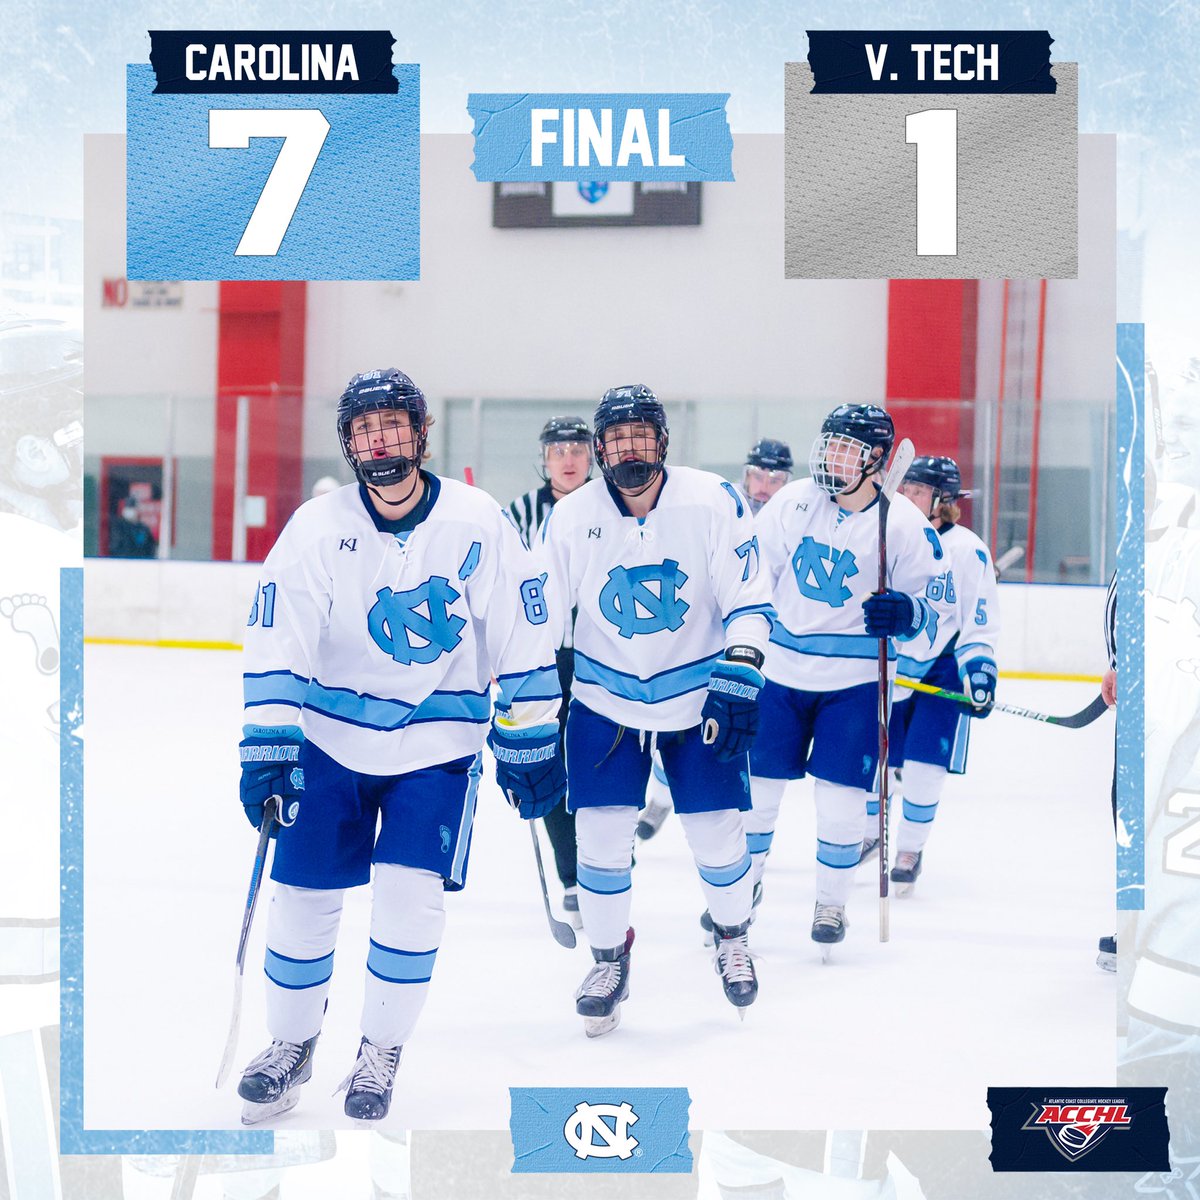 Carolina Hockey on X: The #7 Tar Heels win over #2 Georgetown and advance  to the semifinals! Carolina faces off against #1 Virginia Tech tomorrow at  5 PM for a chance to